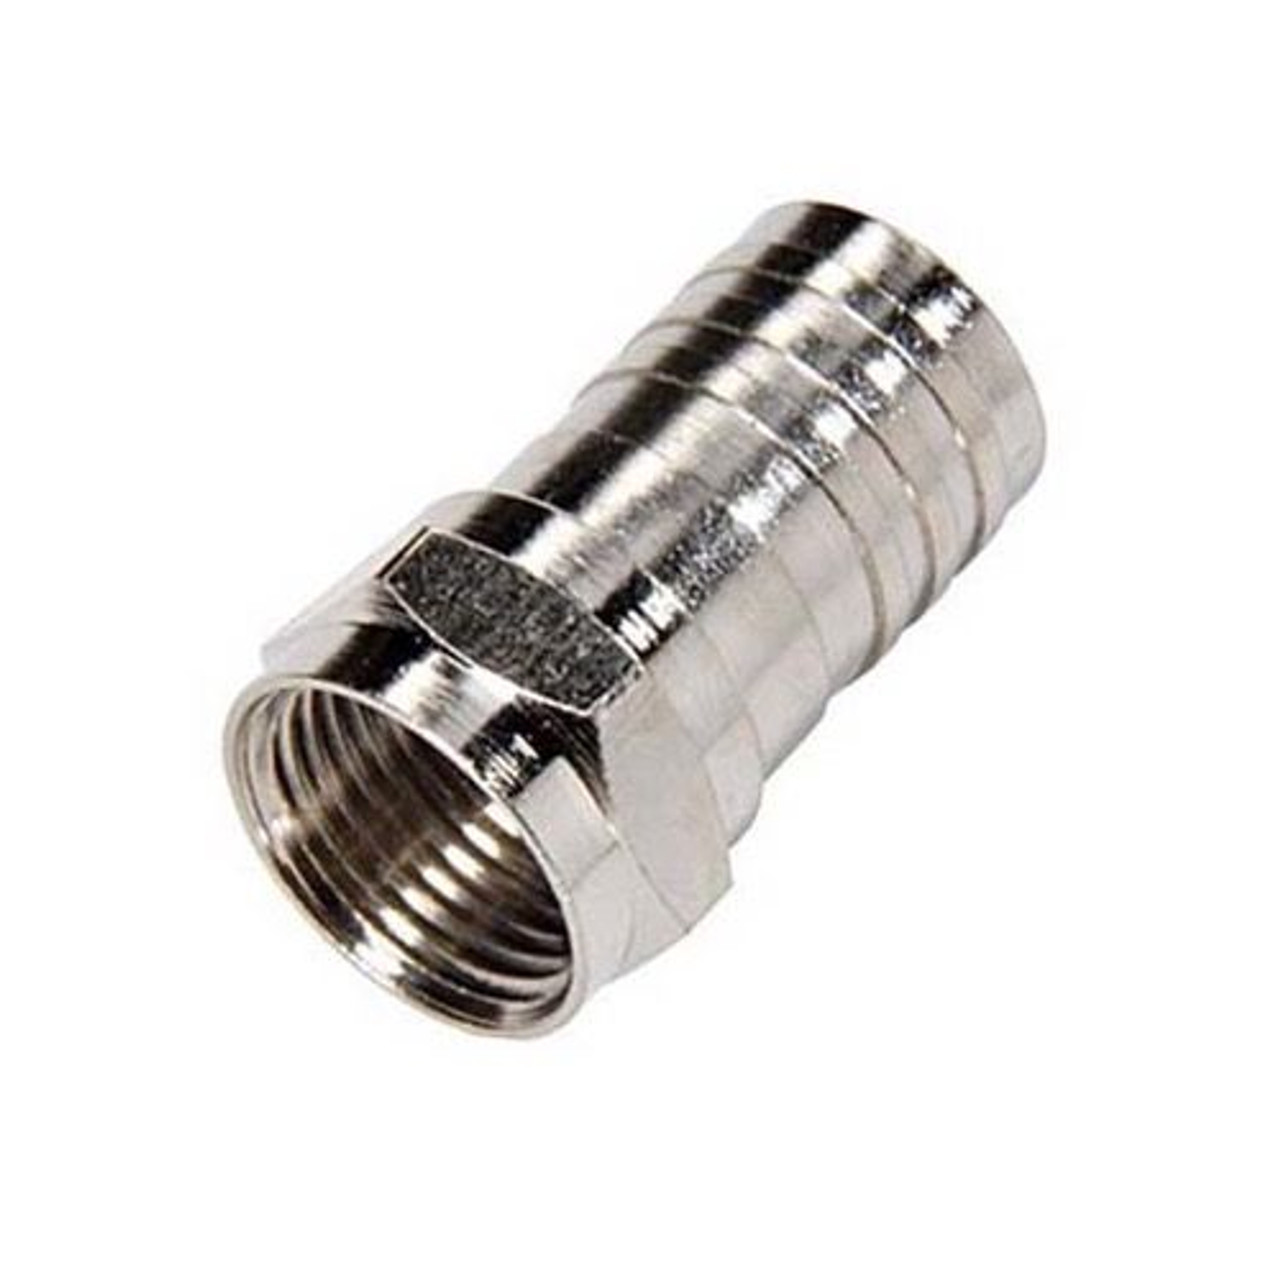 Channel Master RG6 Crimp-On Coaxial Cable F Connector 1 Pack Single RG-6 Coax Cable Hex Crimp End Connector with Attached Crimp Ring, Part # 7161